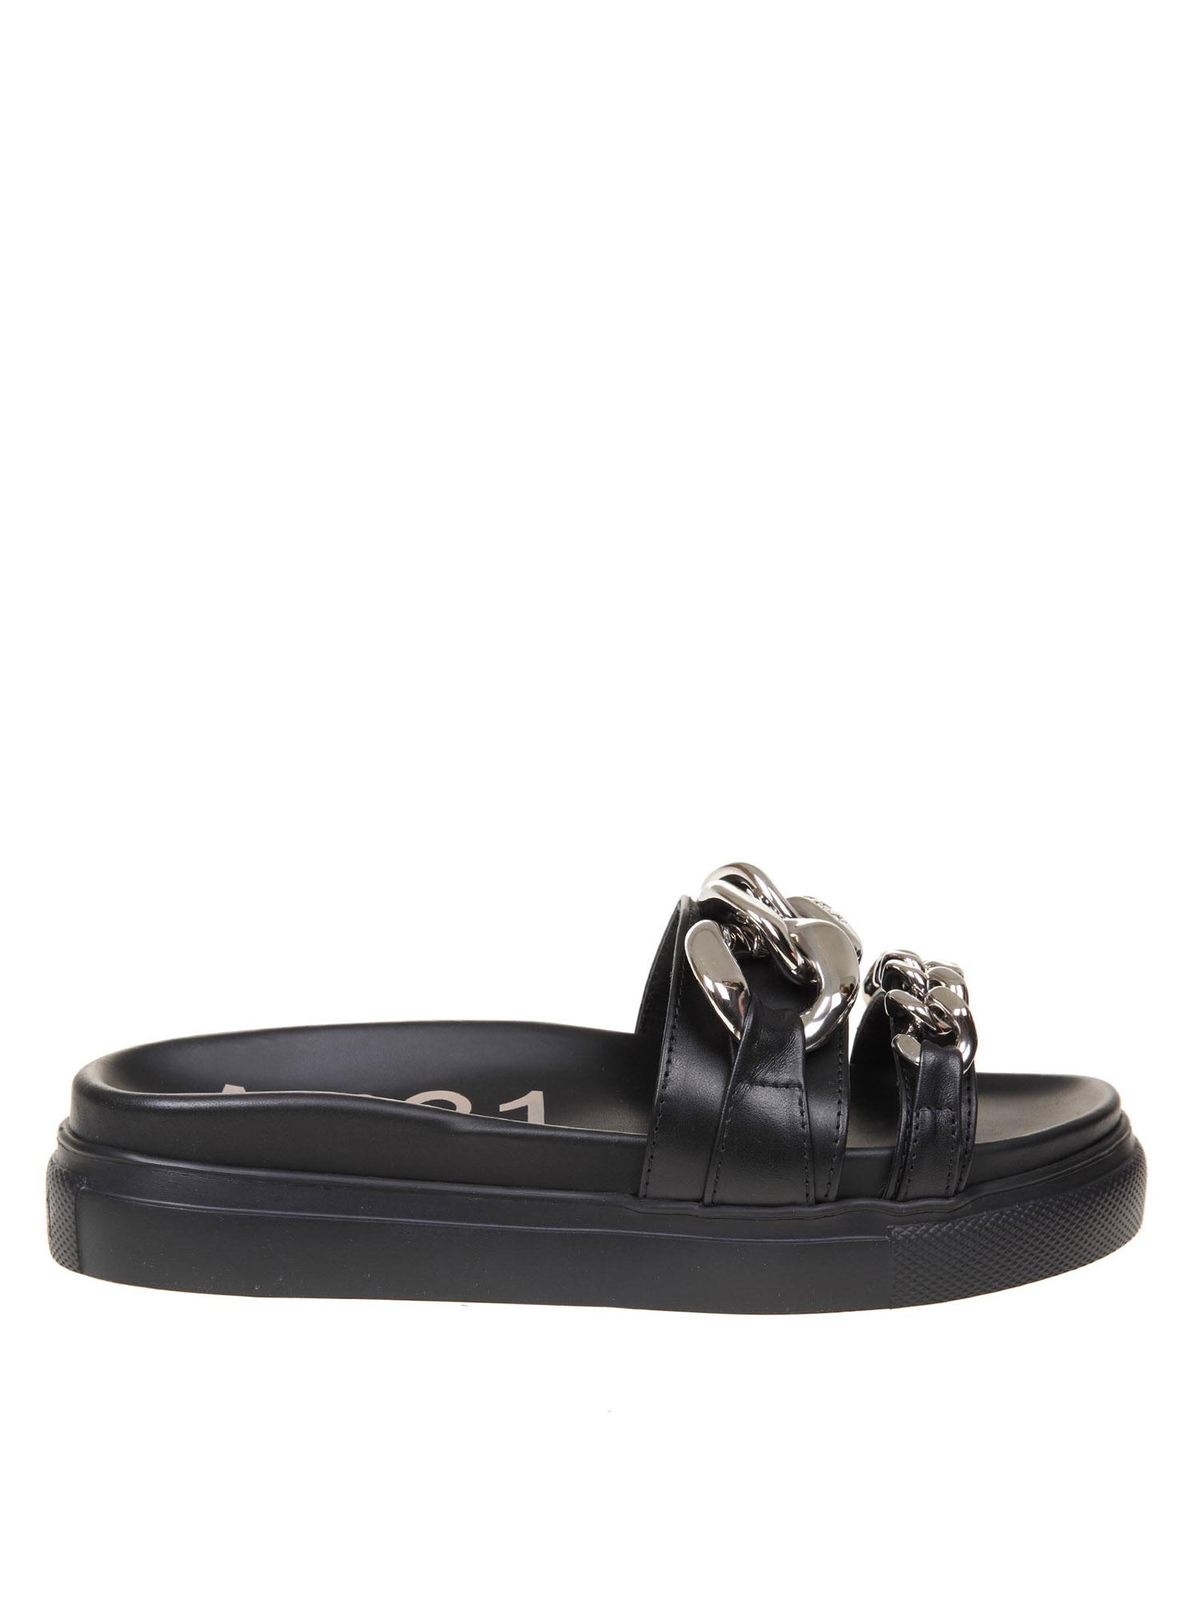 N°21 CHAINED SLIDES IN BLACK